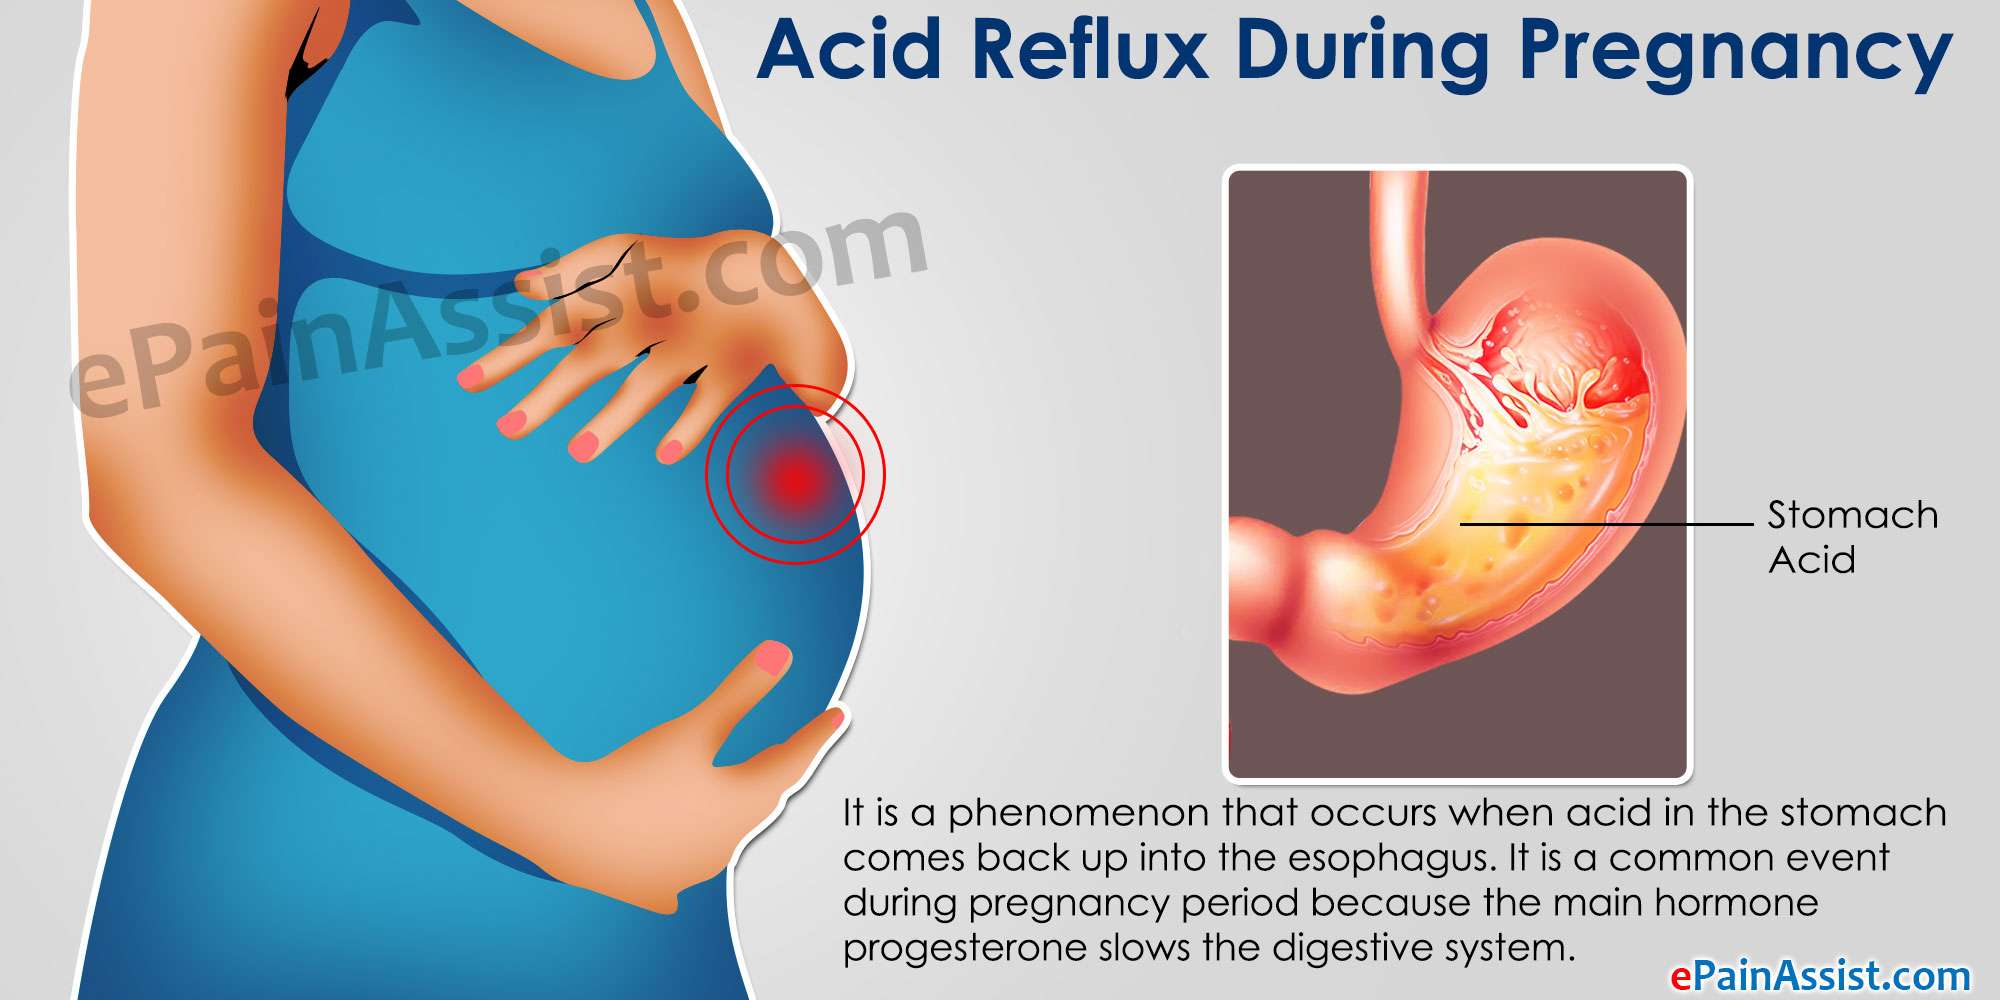 Indigestion And Reflux Causes Pregnancy Early During